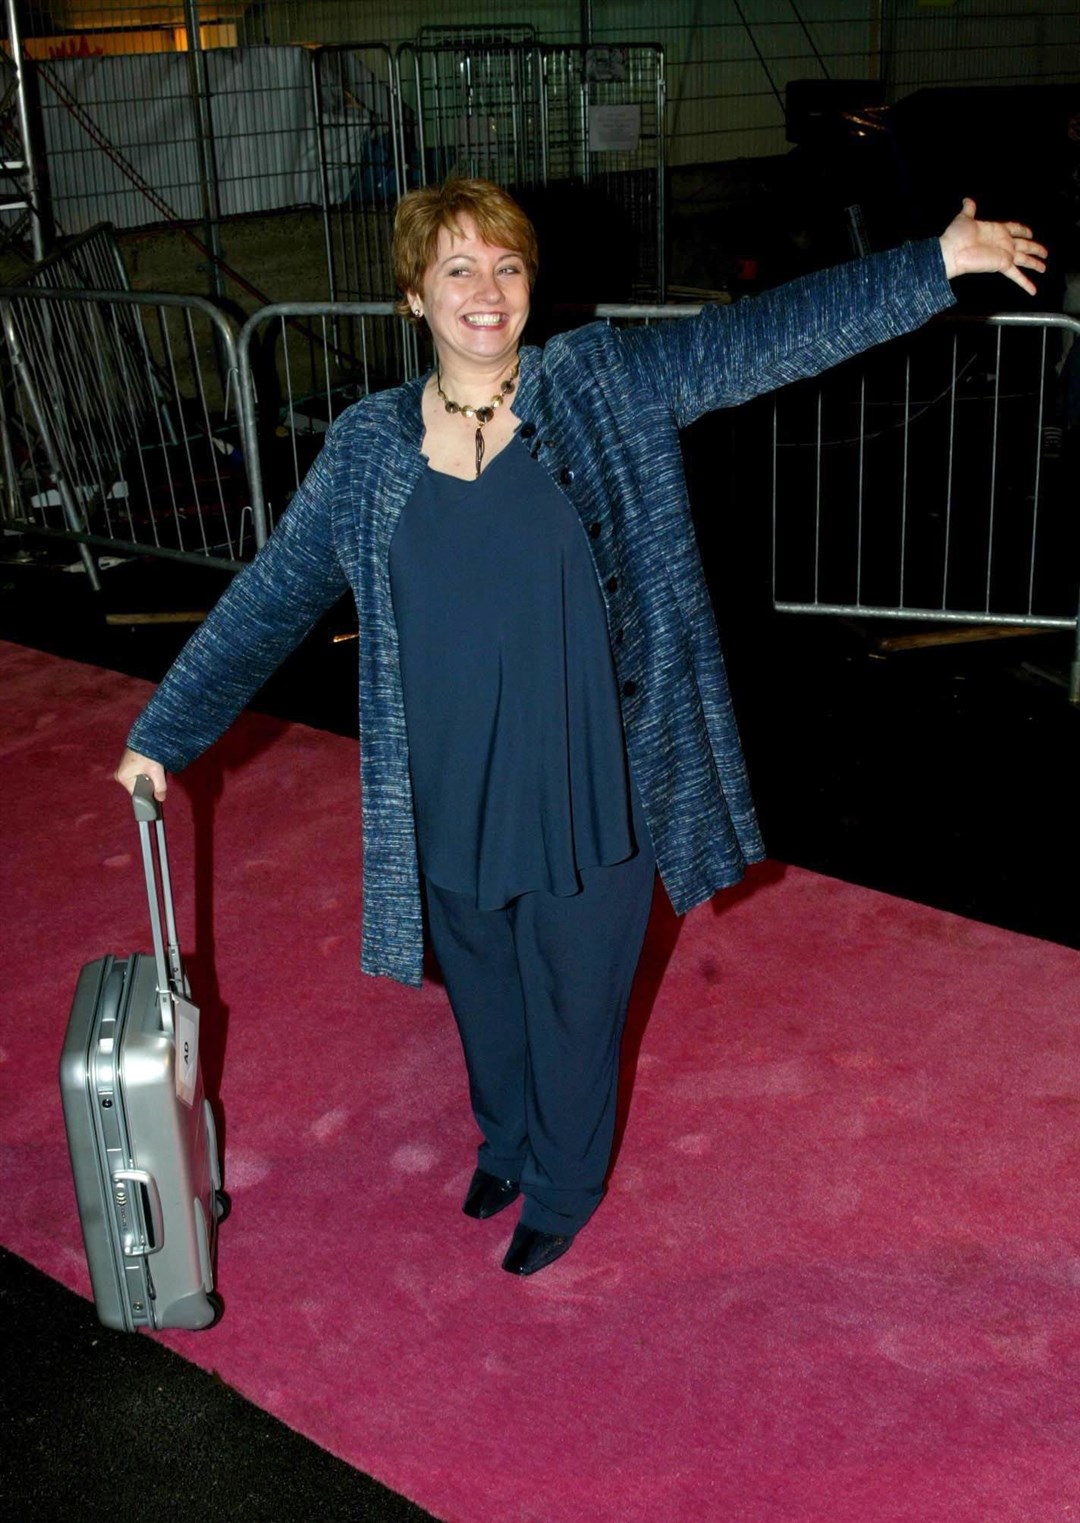 Anne Diamond leaving the Big Brother house in 2002 (Tim Whitby/PA)